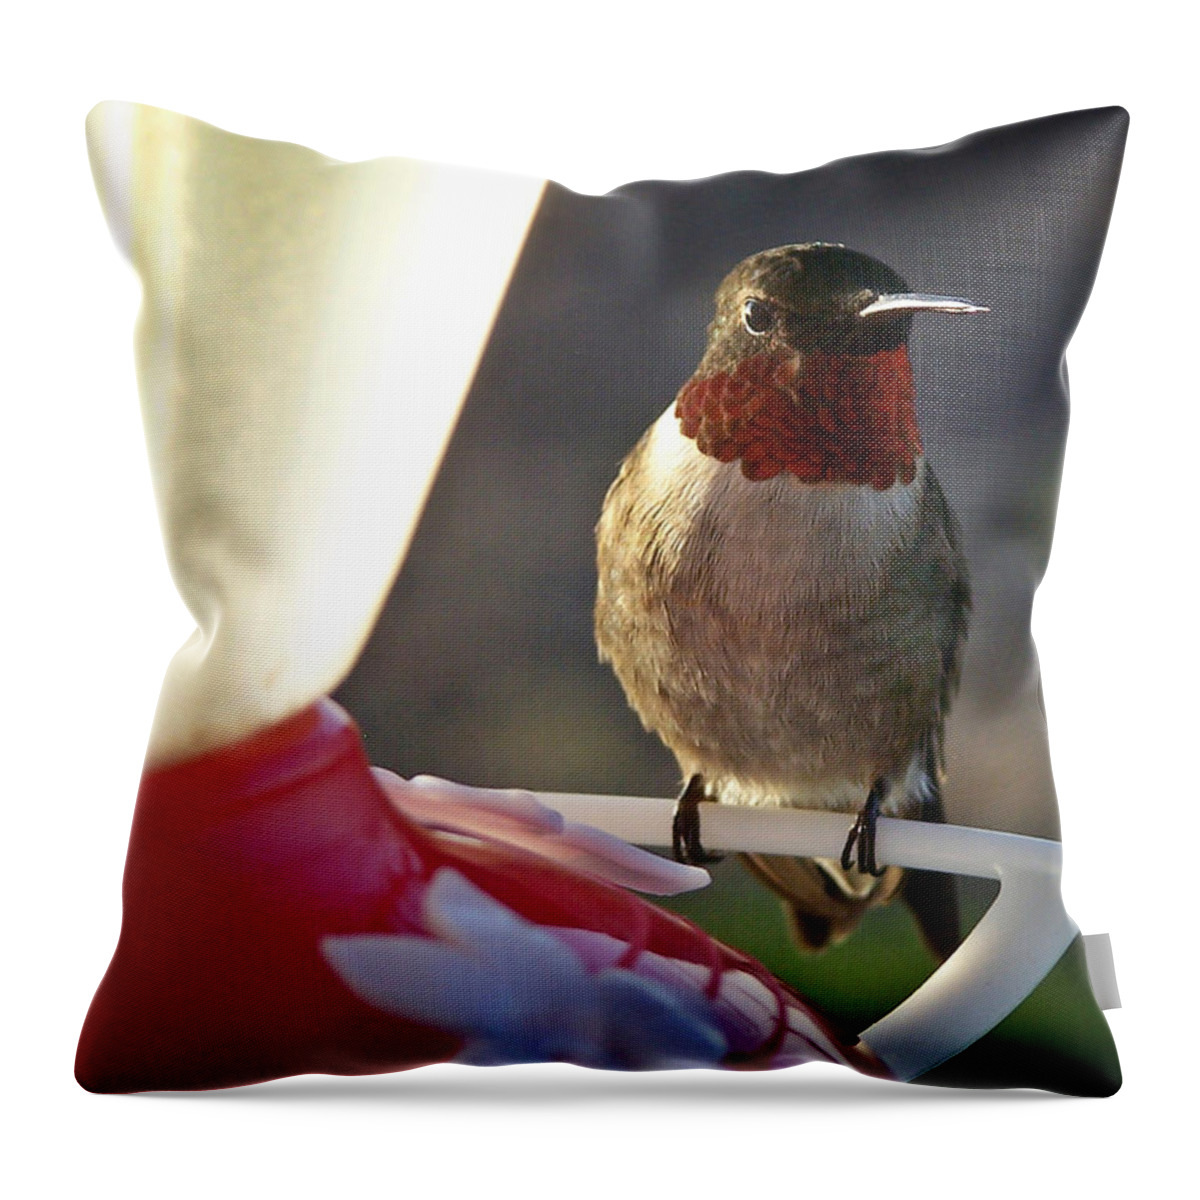 Early Morning Light Throw Pillow featuring the photograph Classic Portrait Pose by Bill Pevlor